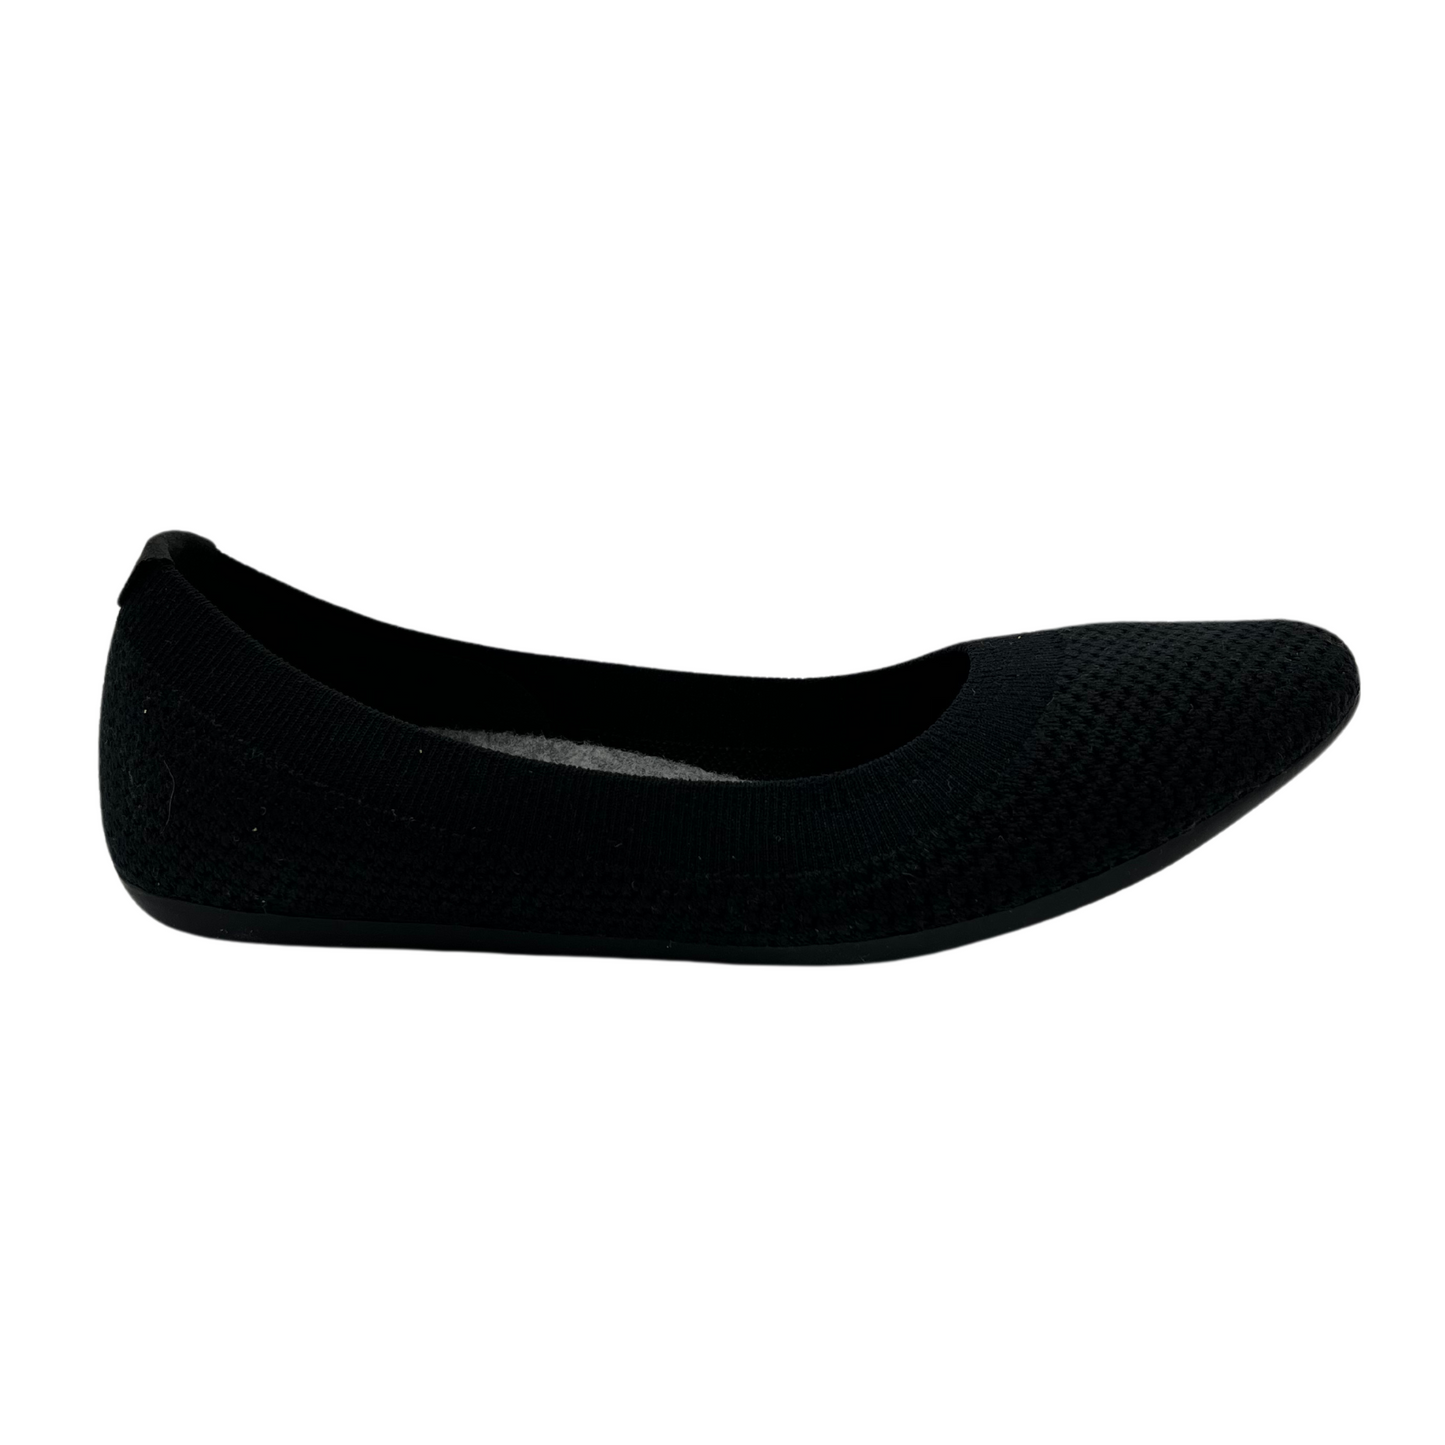 Right view of stretchy black ballet flat with ribbed collar and rounded toe